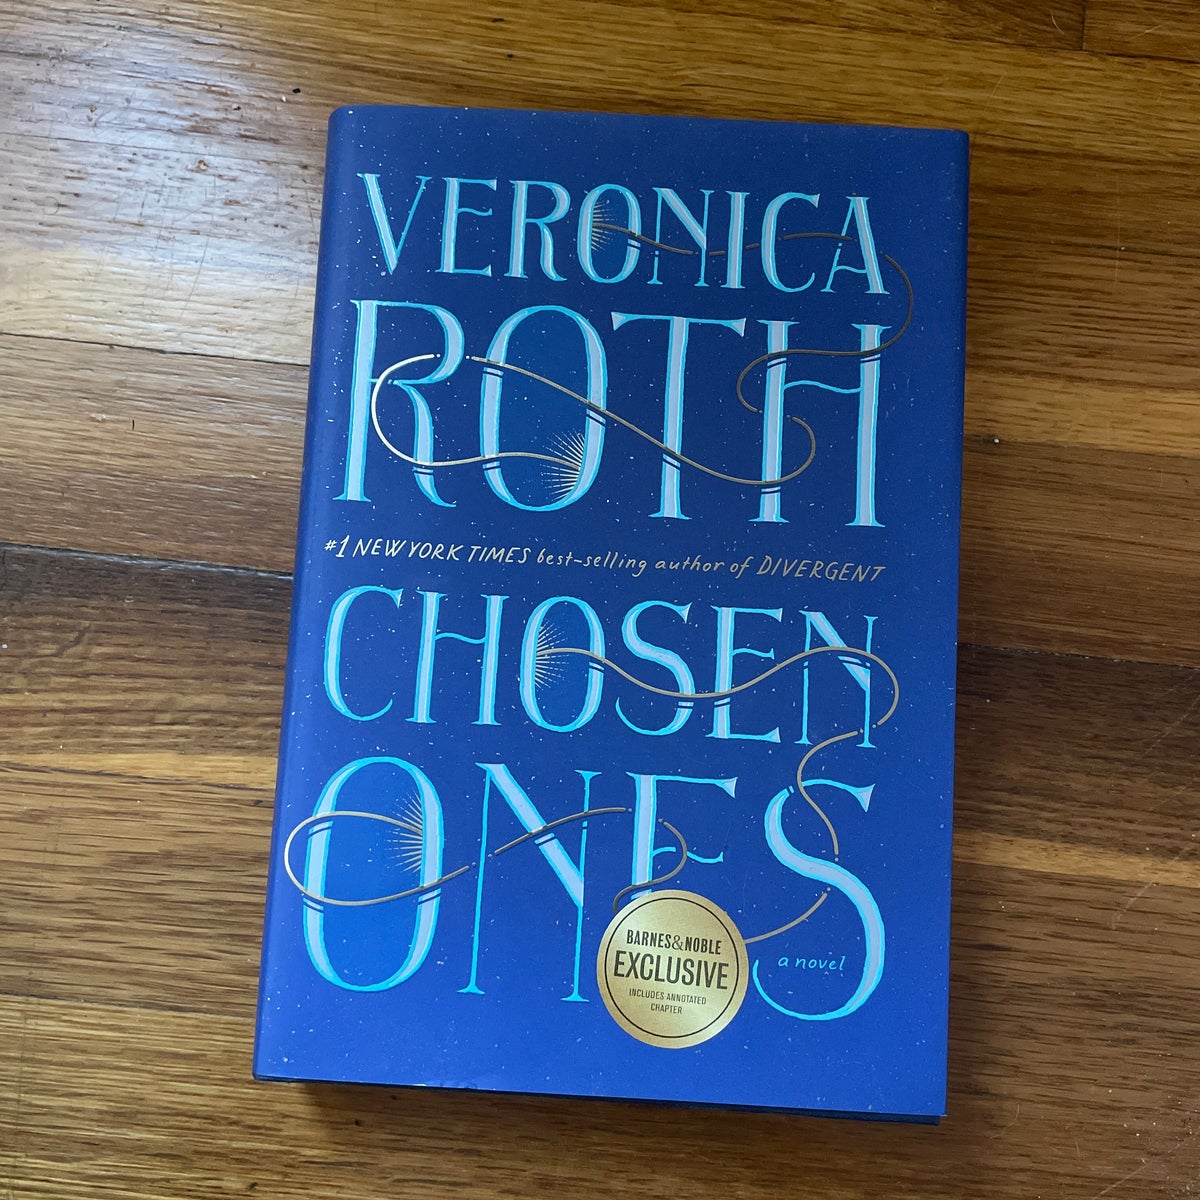 Chosen Ones (B&N Exclusive Edition) by Veronica Roth, Hardcover